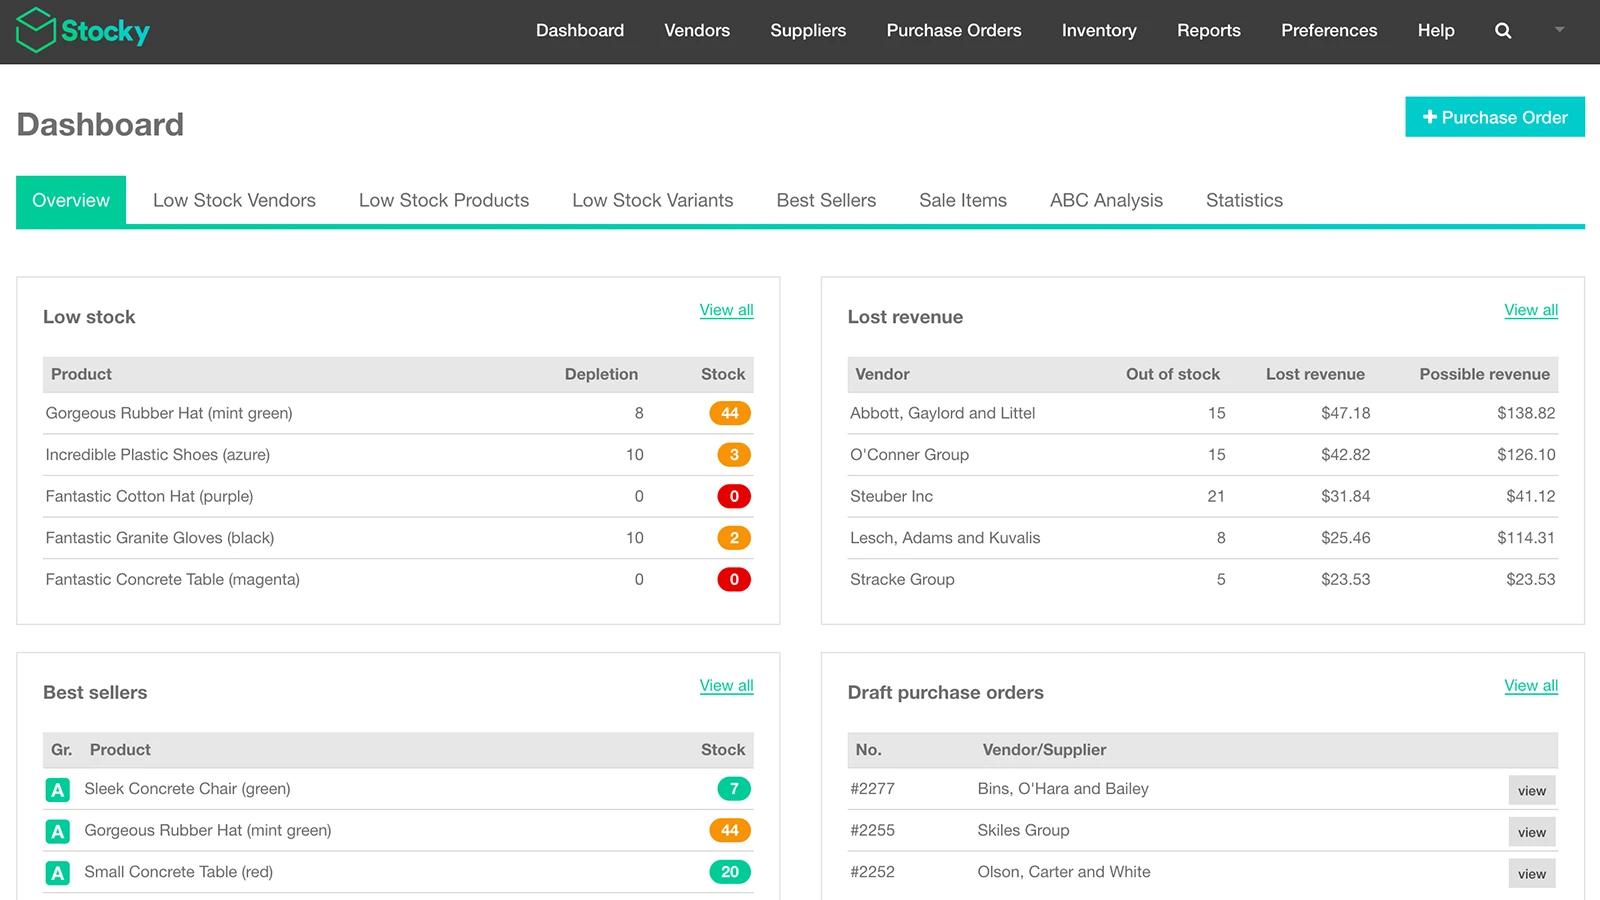 Sample image of Stocky's dashboard admin page.